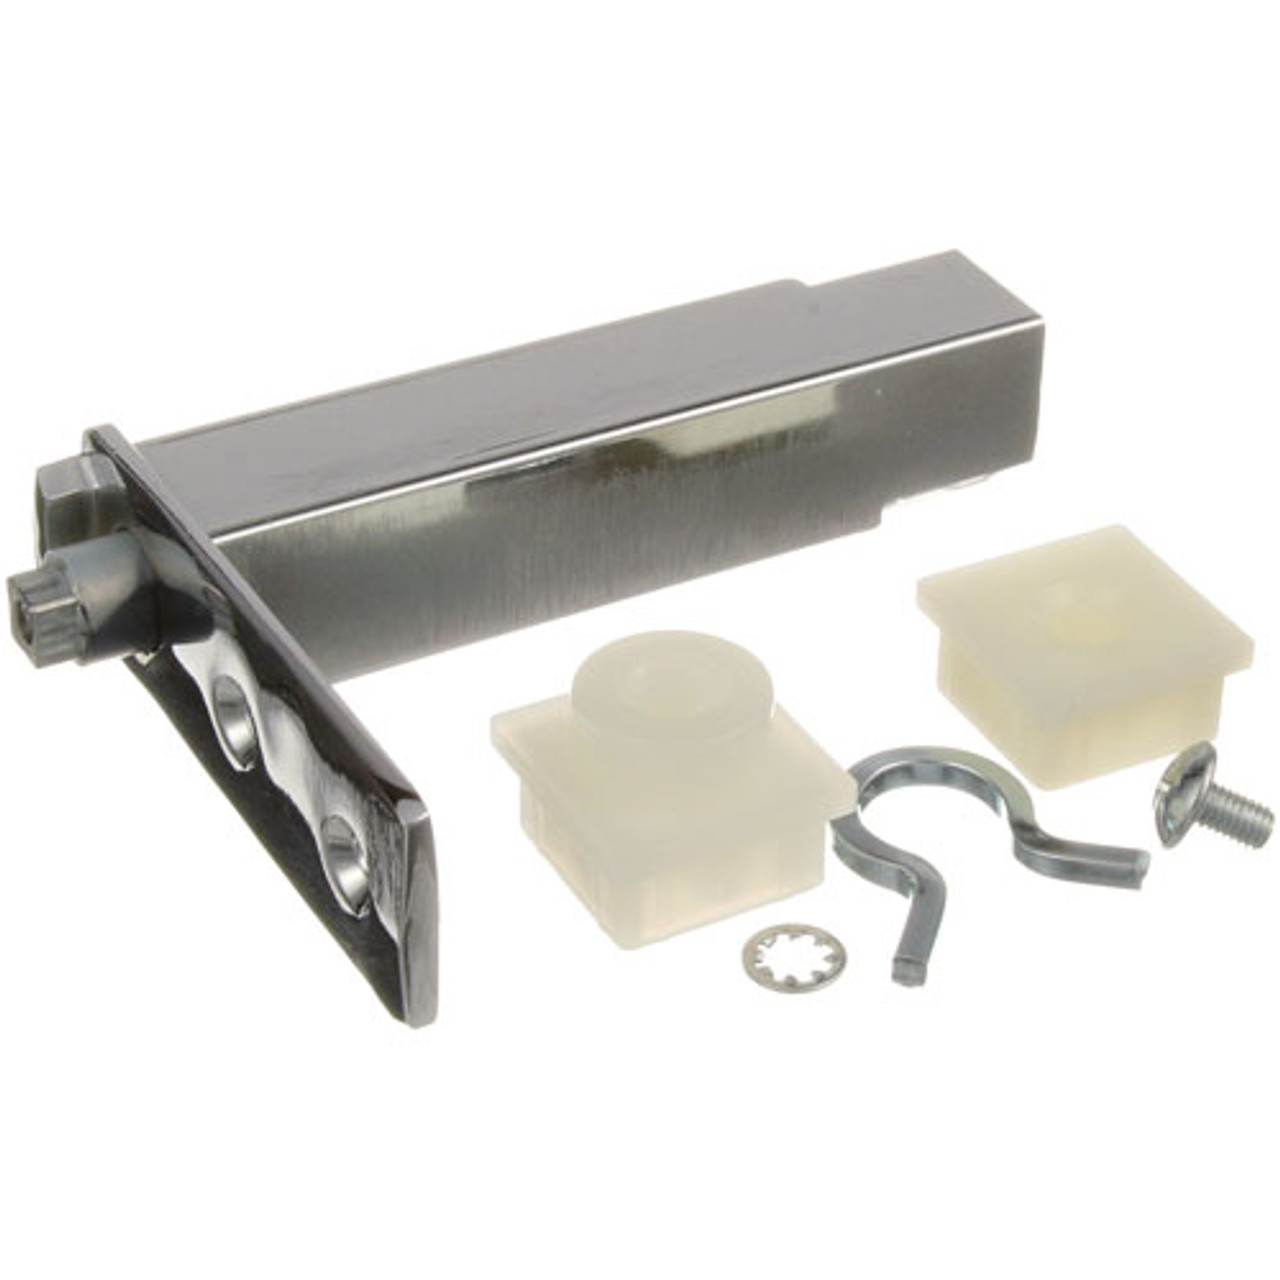 Concealed Hinge - Replacement Part For Randell HDHNG0101